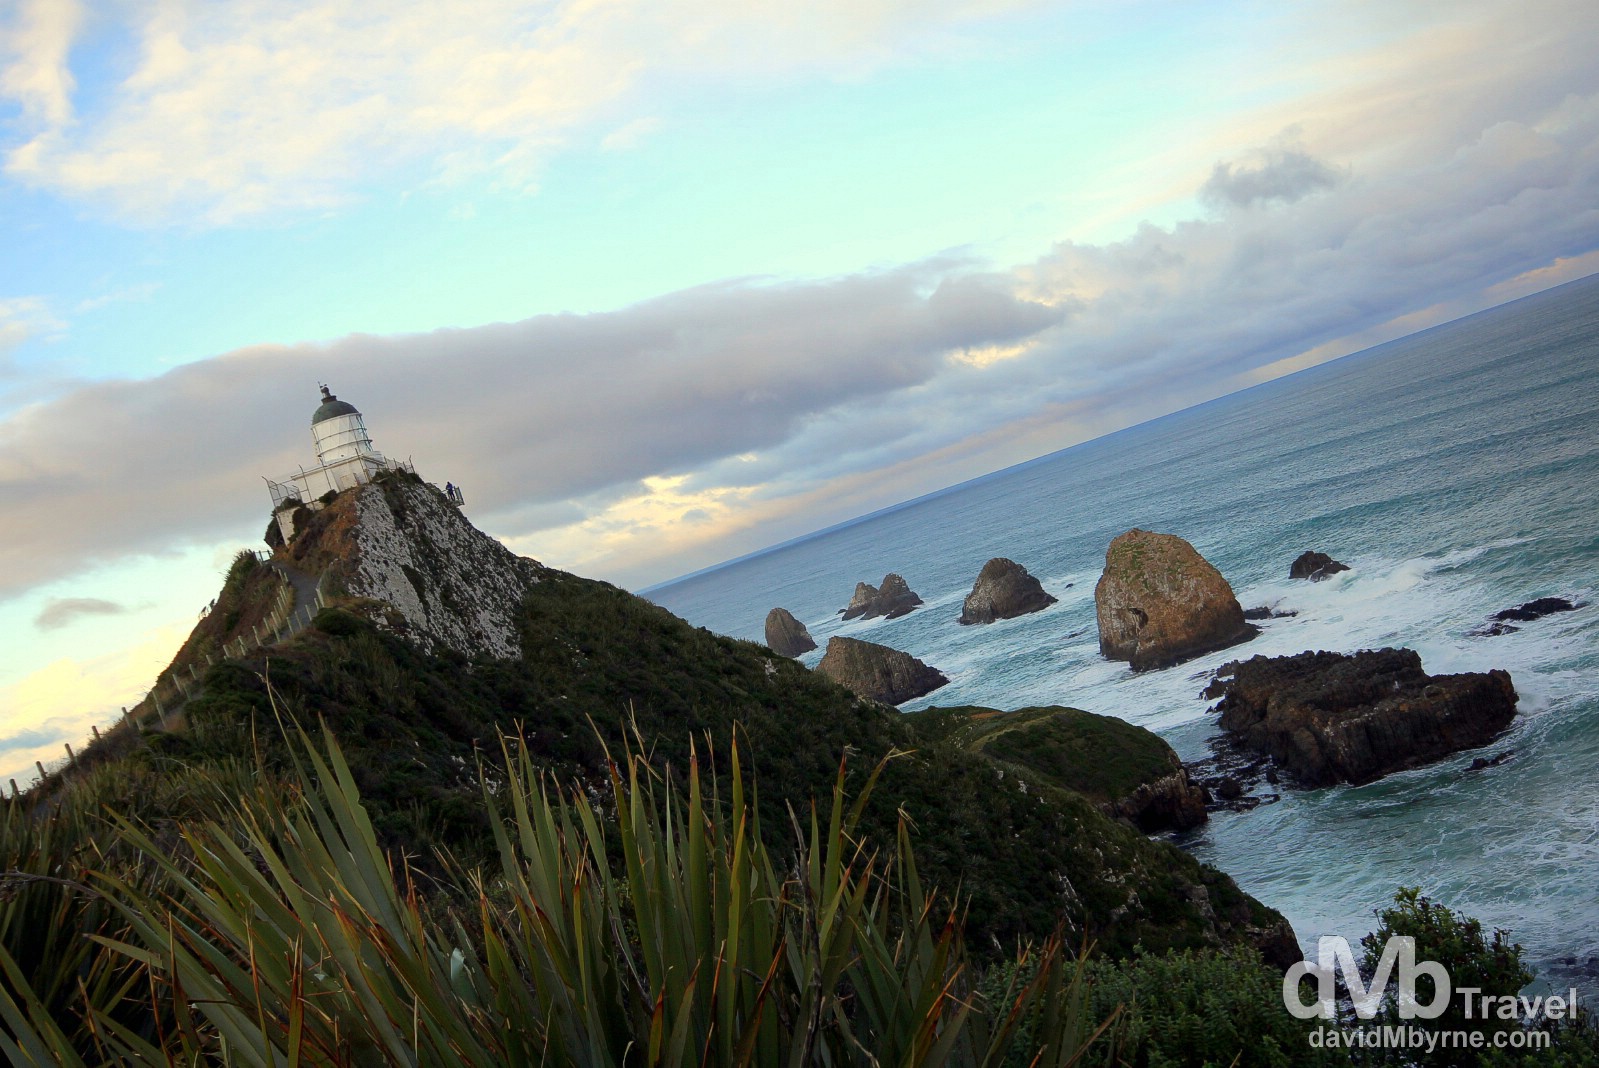  Nugget Point, The Catlins, South Island, New Zealand. May 28th 2012.